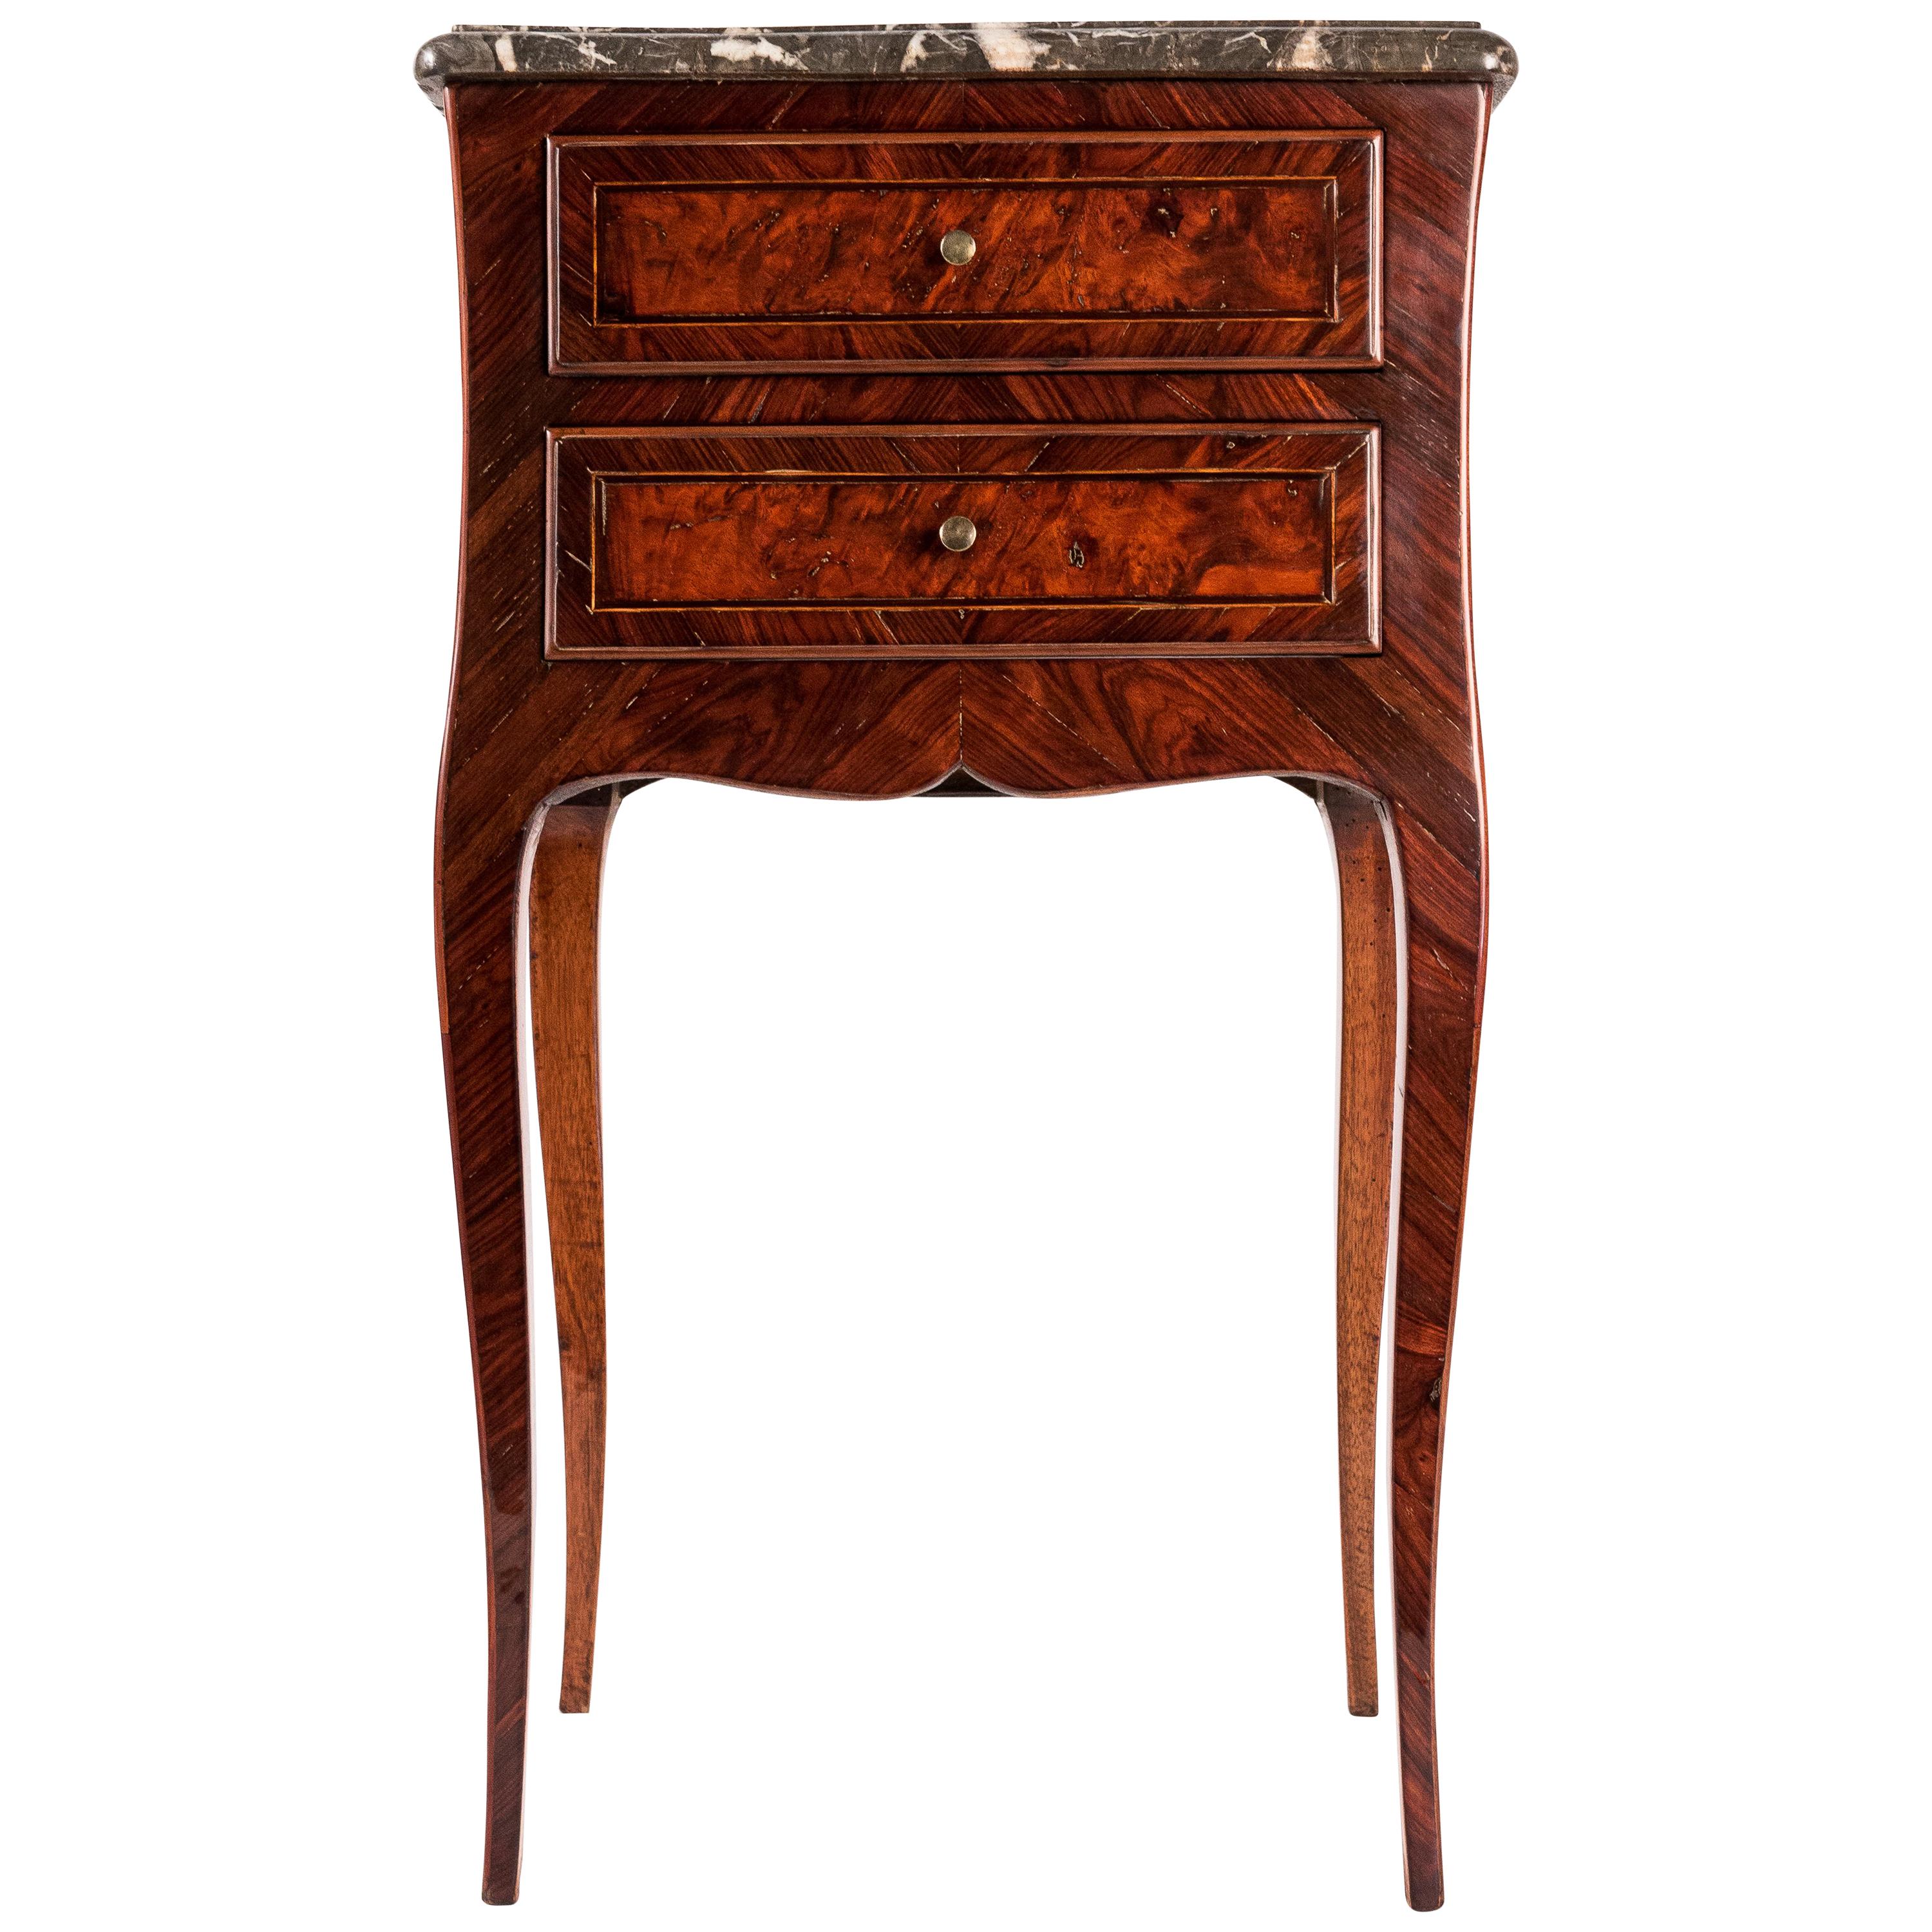 French Louis XV Style Small Serpentine Marble-Top Commode, circa 1820-1830